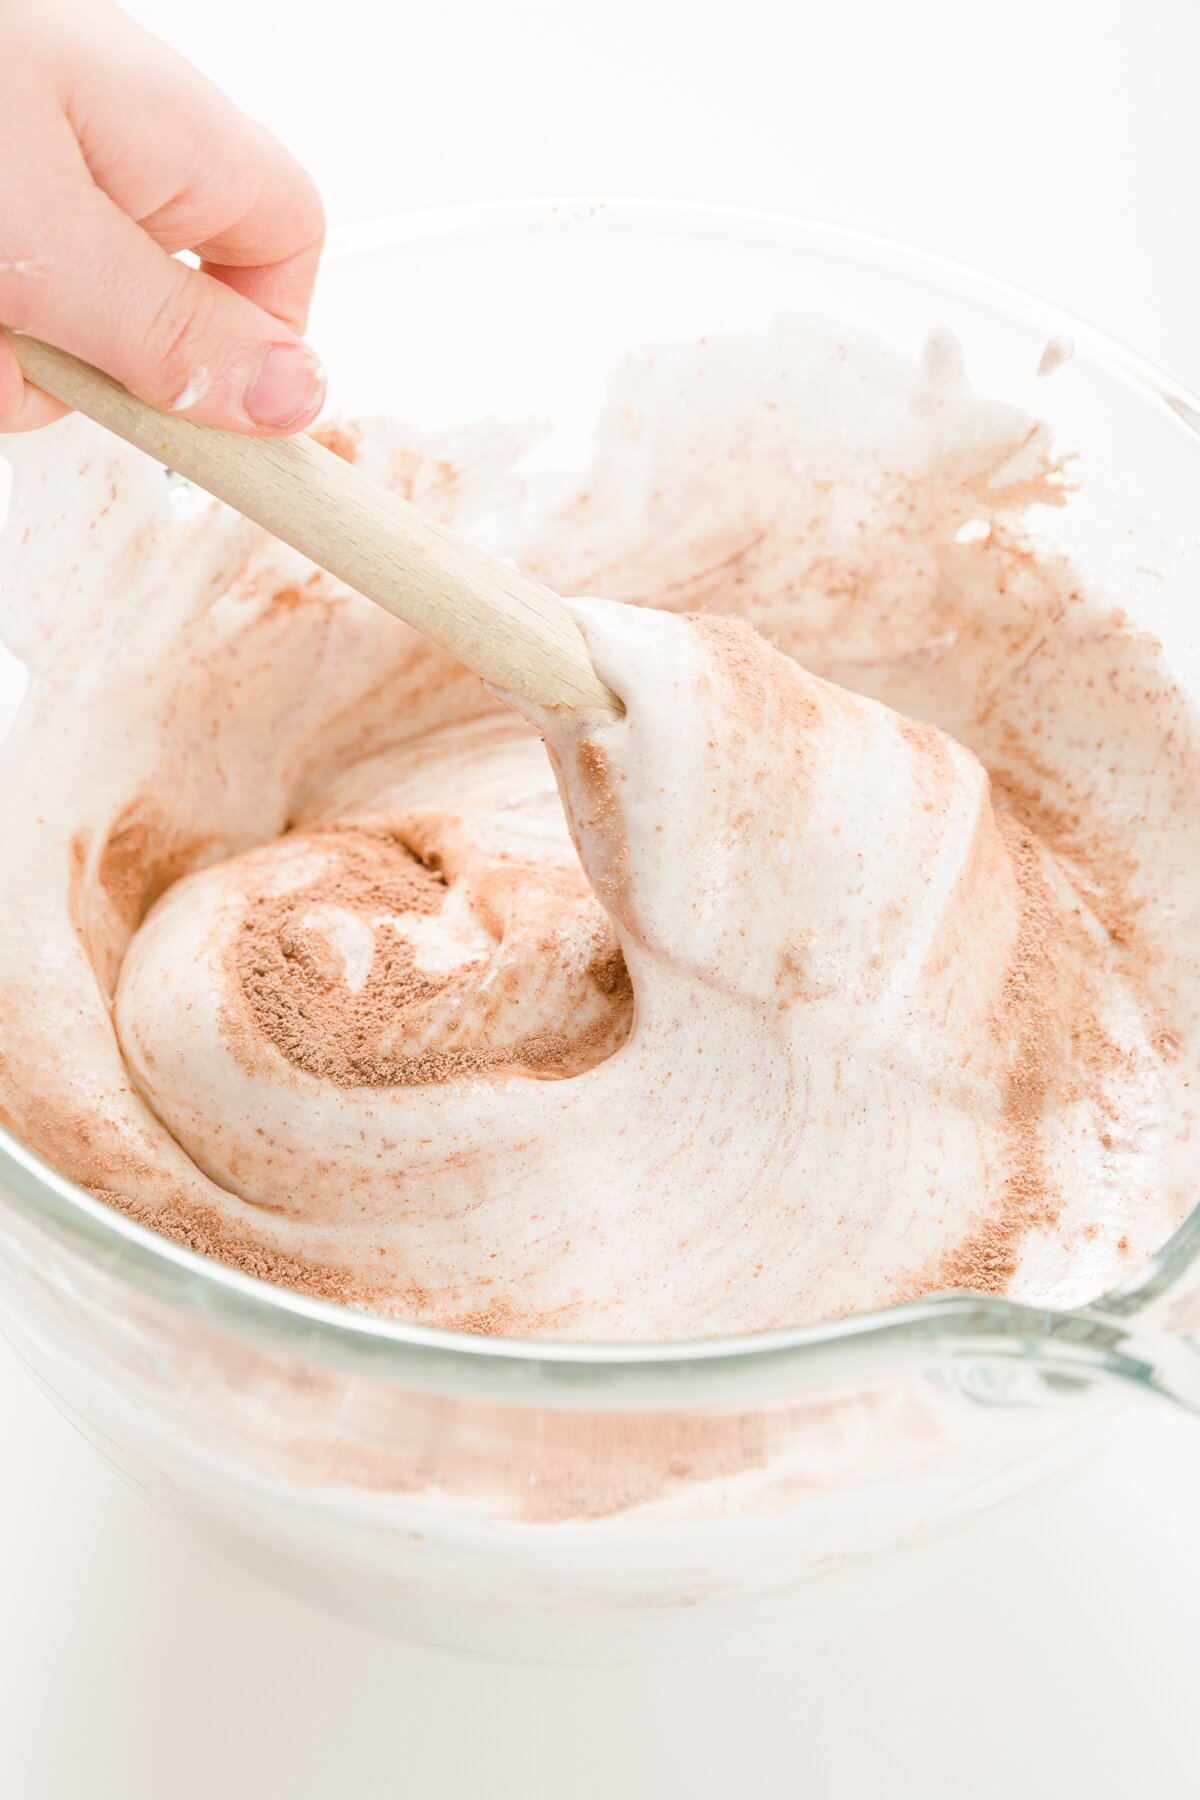 Folding in cocoa powder and other dry ingredients into whipped eggs with a spatula in a glass bowl